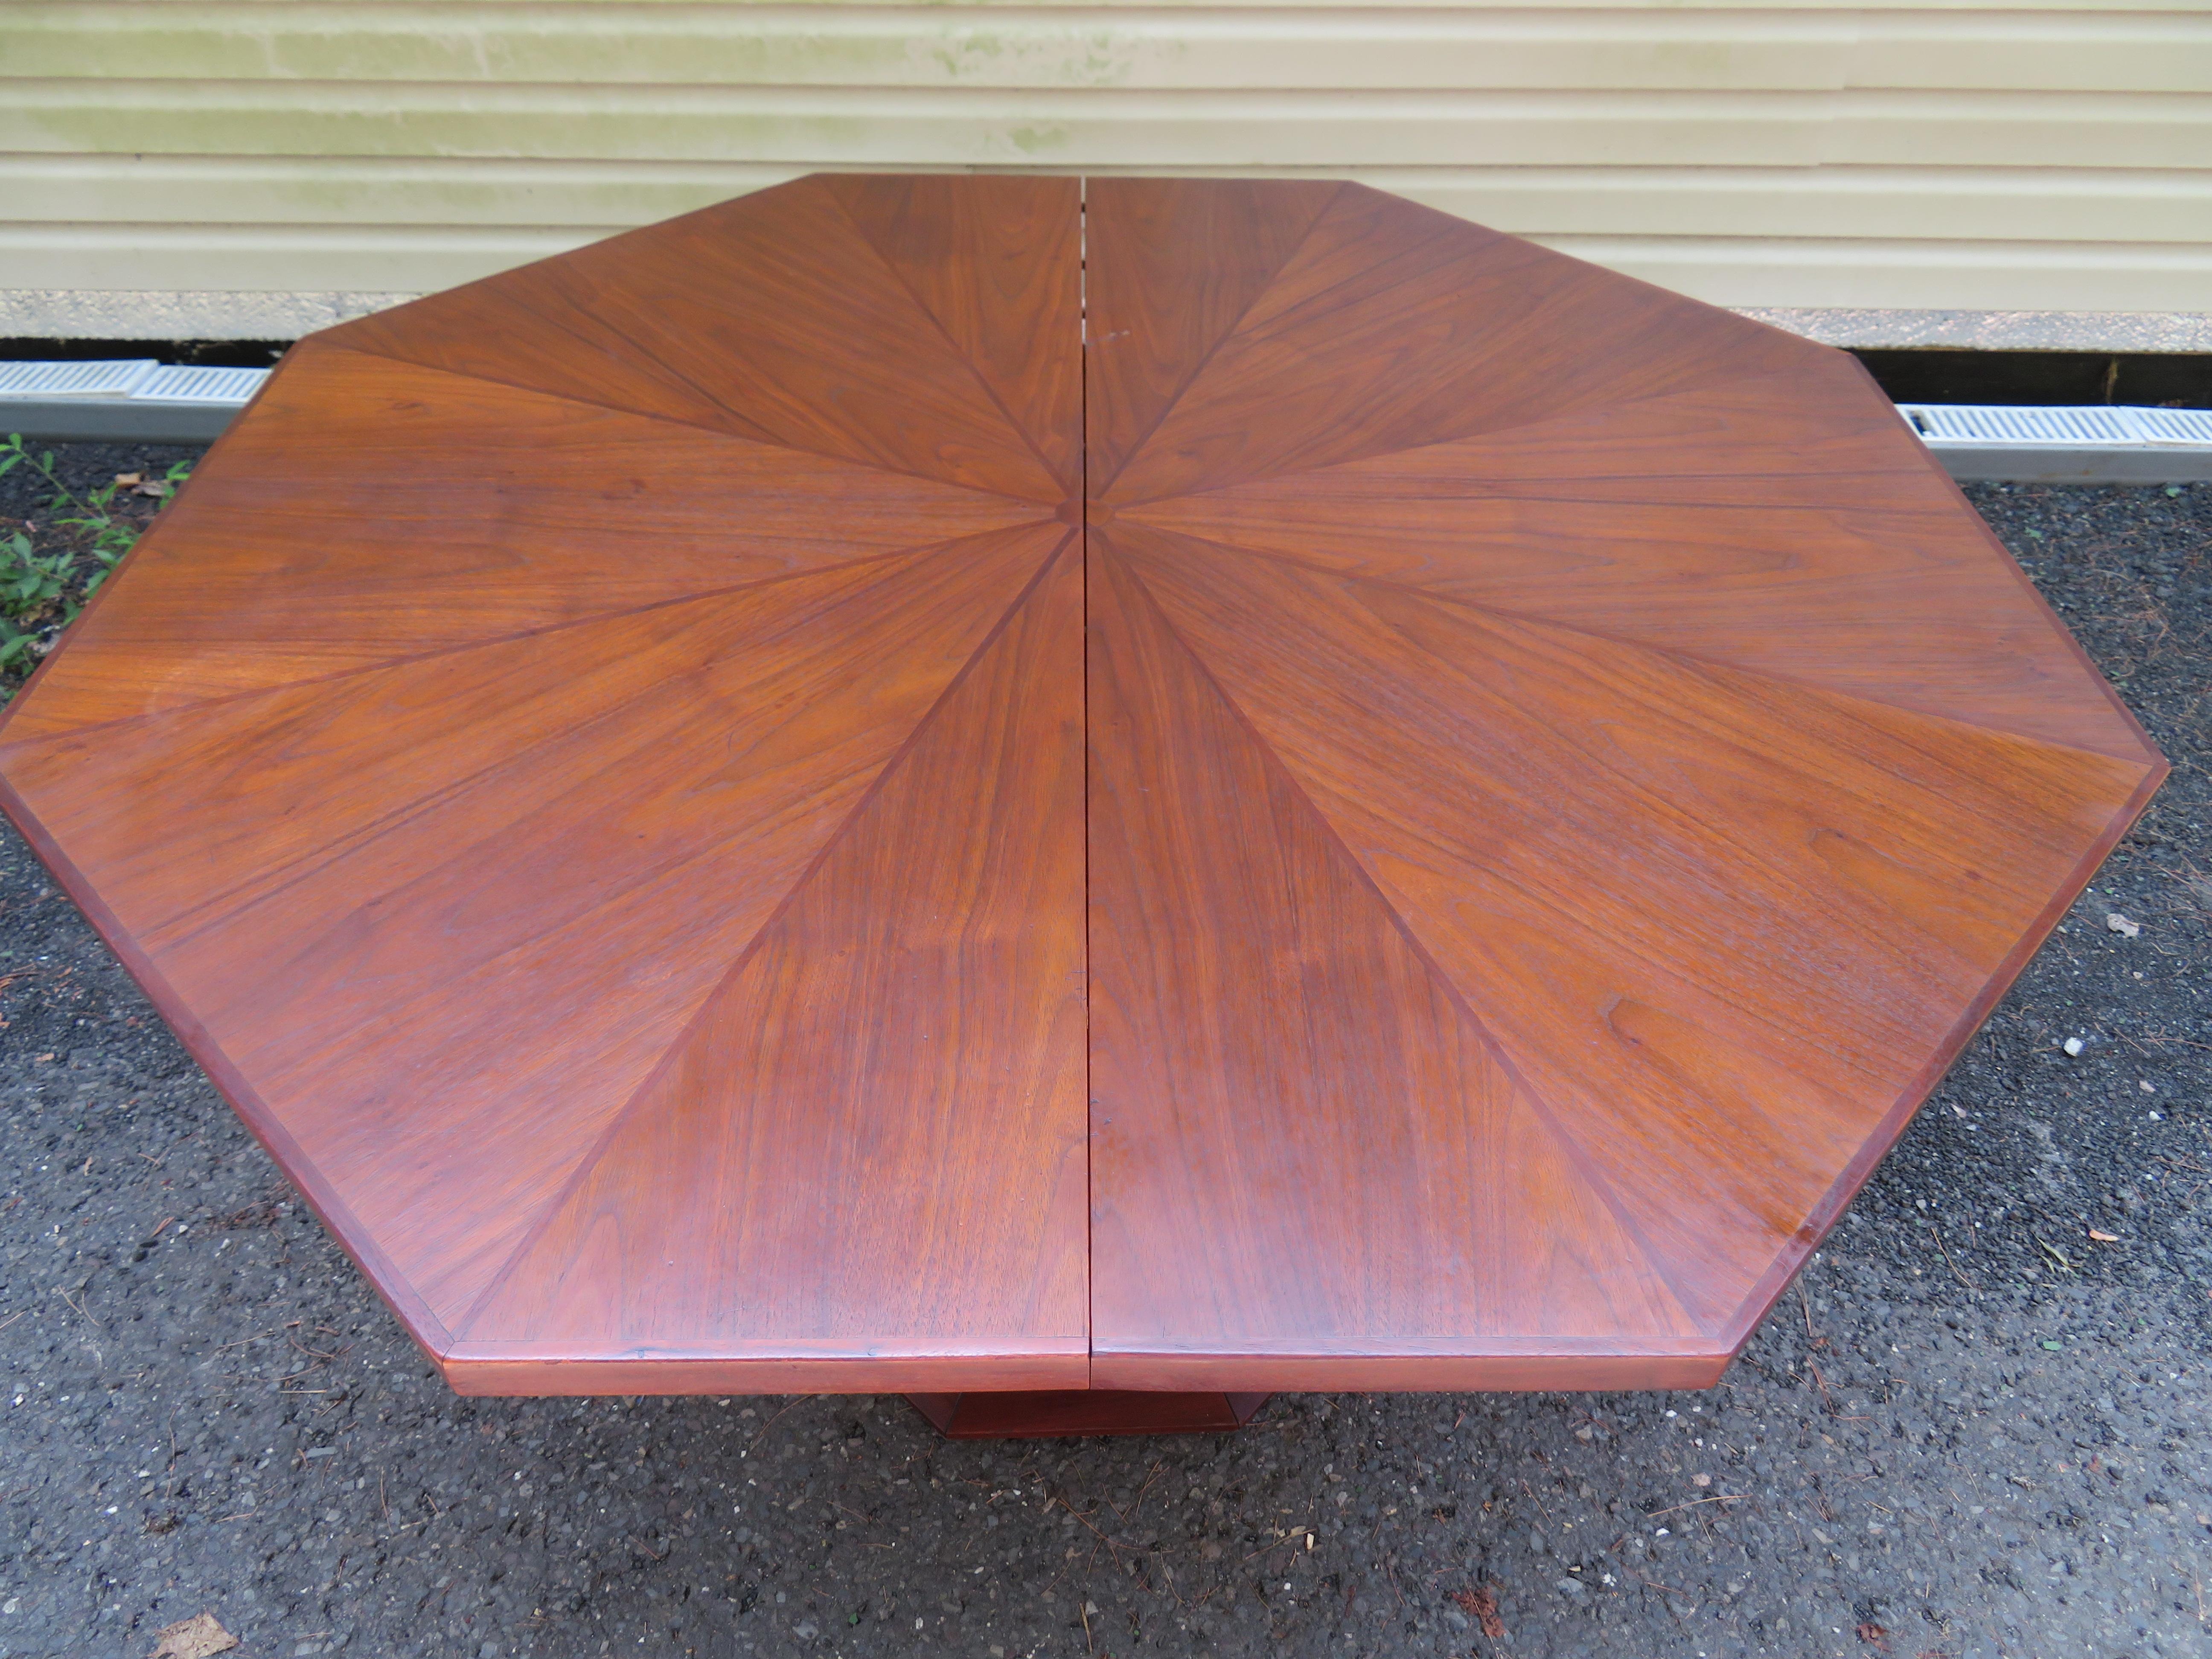 Gorgeous Mid-Century Modern cathedral style Probber inspired pedestal dining table with three leaves. The top is amazing with circle inlay and dynamite octagon shape, the three leaves are well matched to the original finish. This sculptured walnut